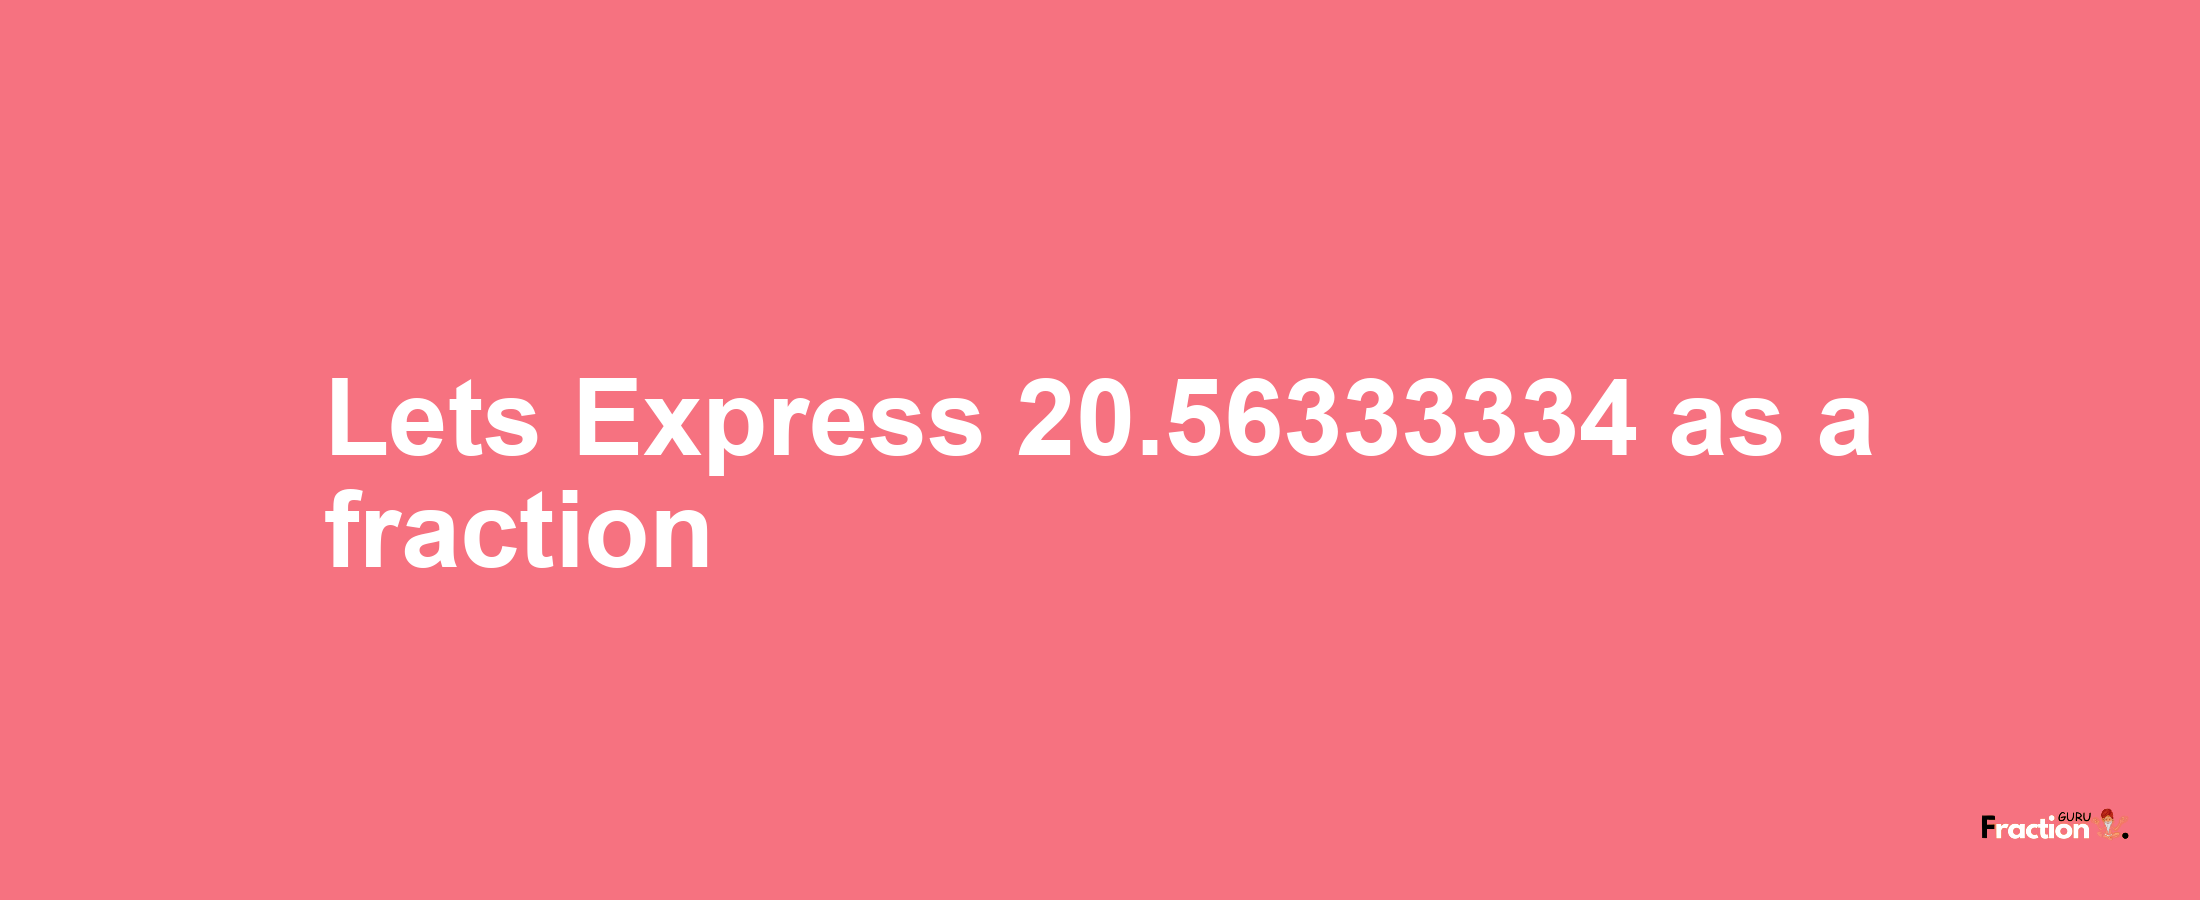 Lets Express 20.56333334 as afraction